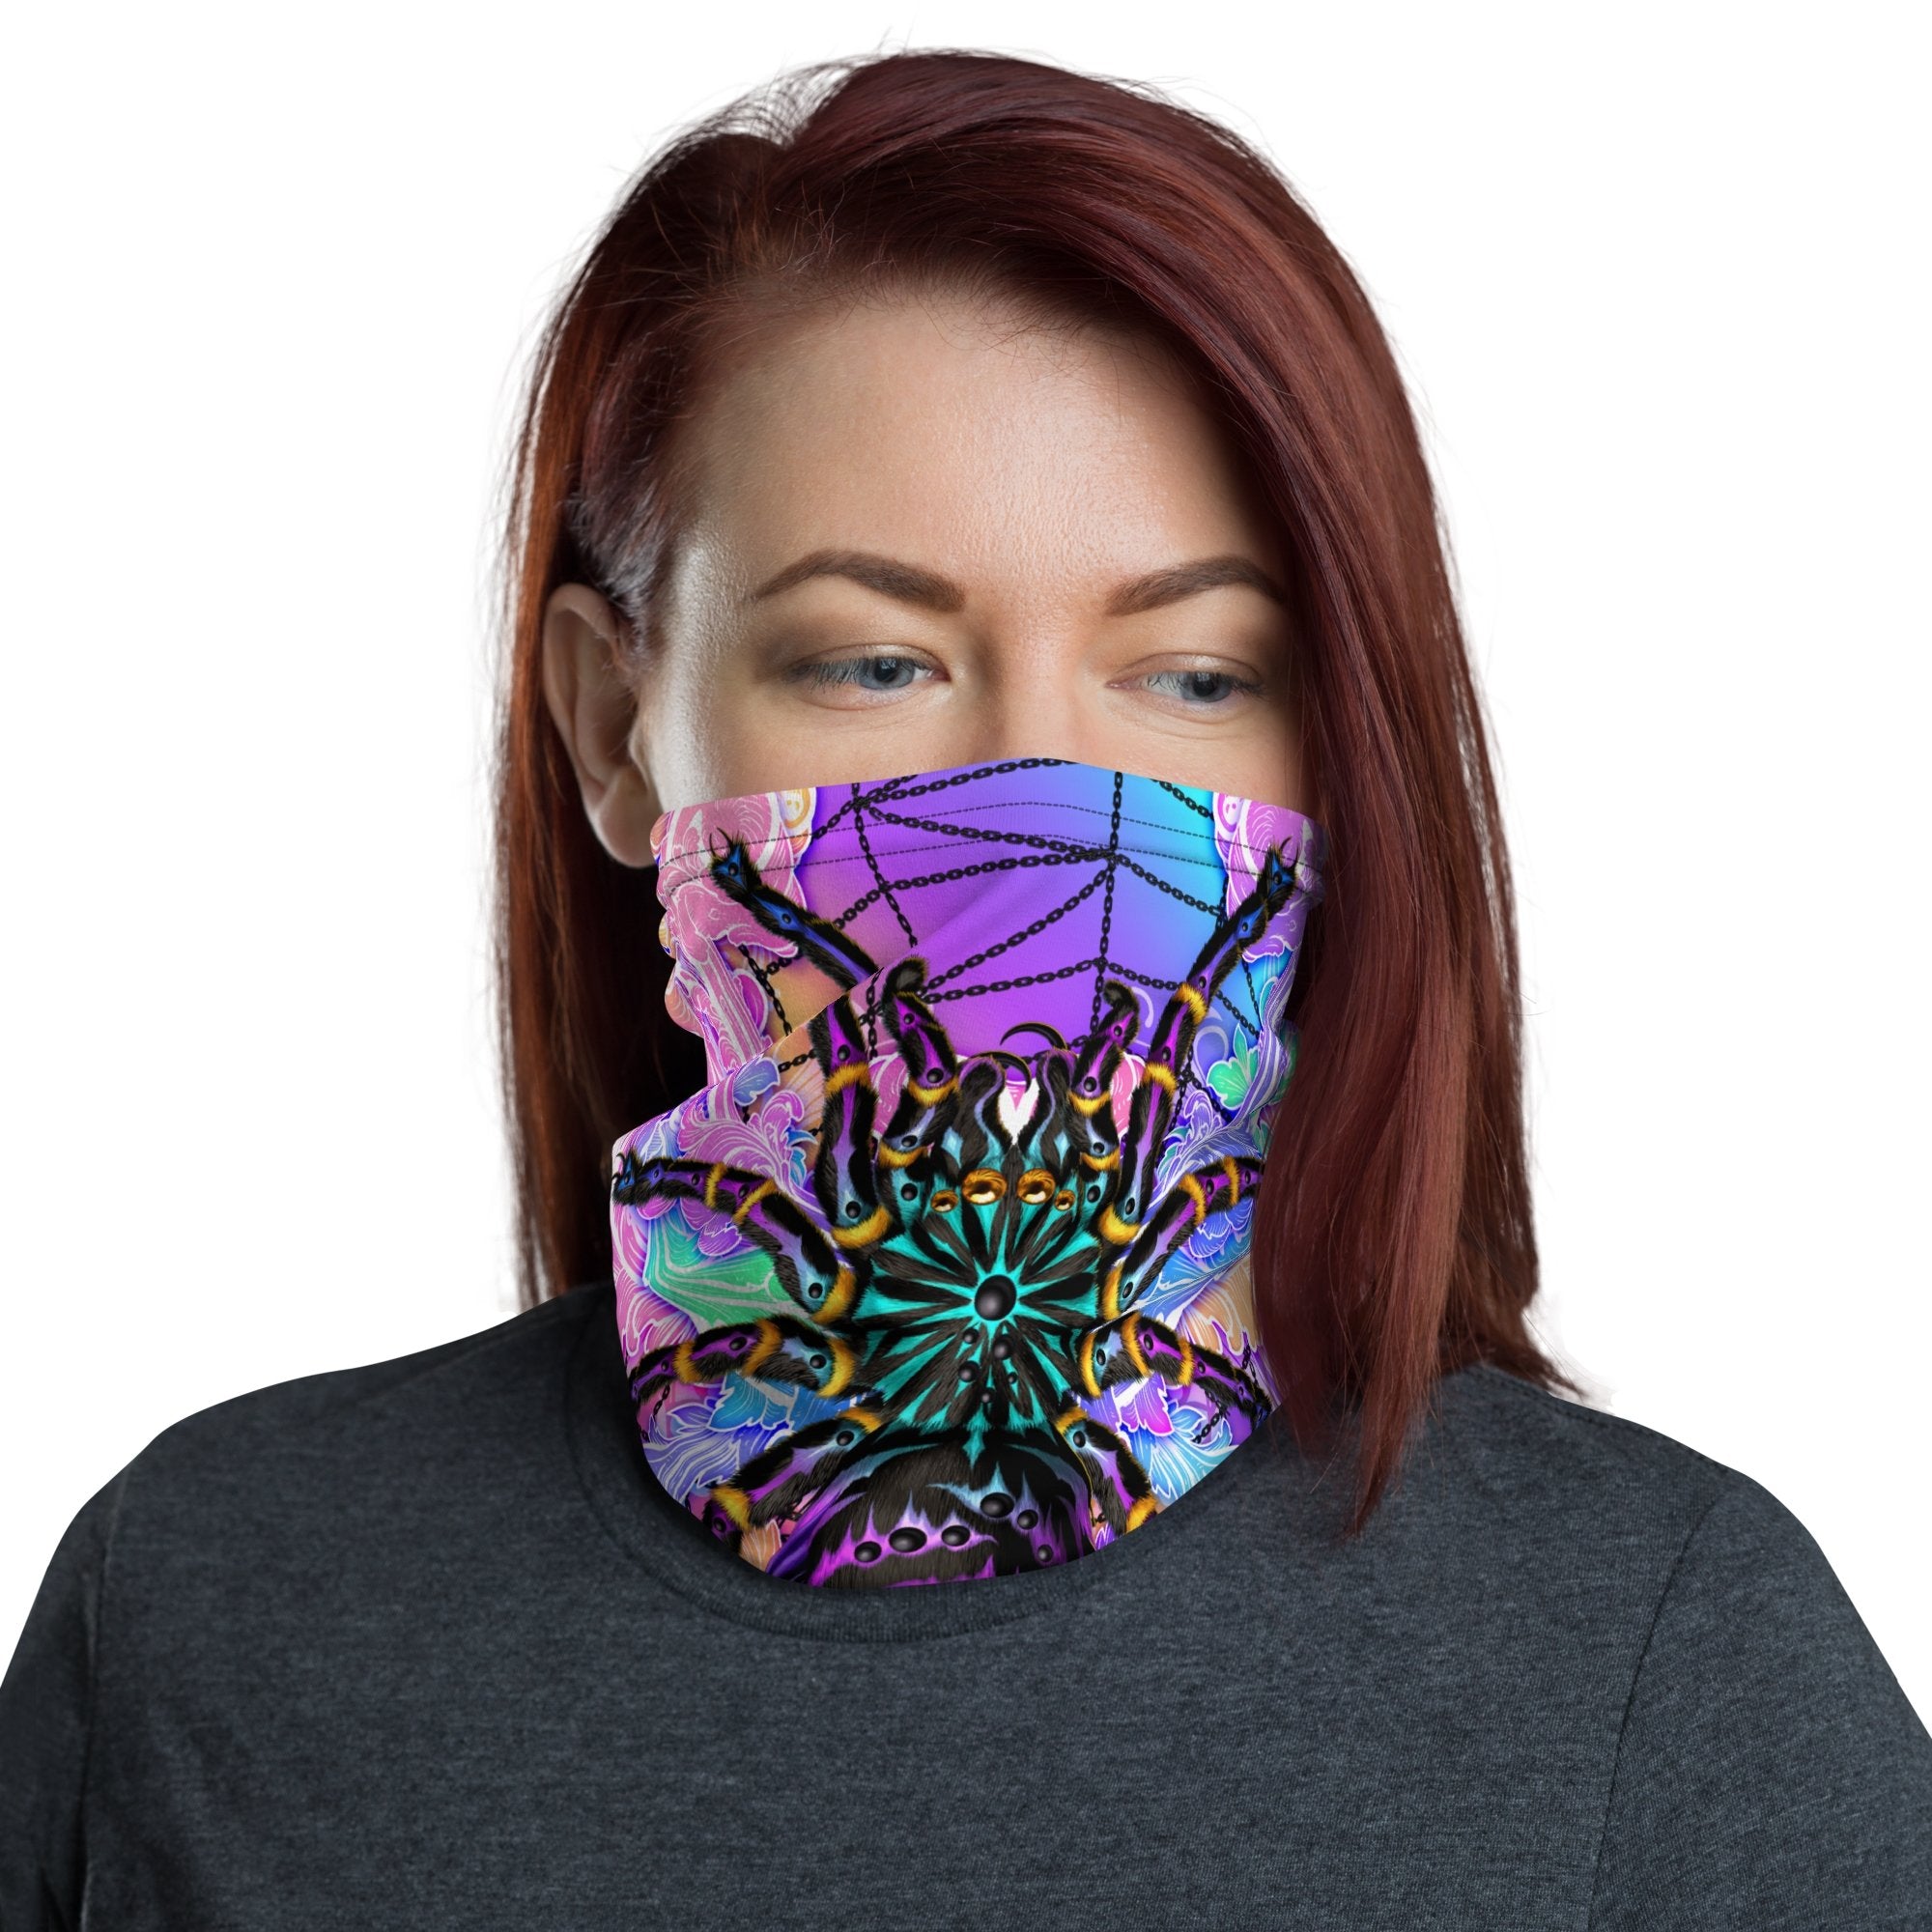 Psychedelic Neck Gaiter, Face Mask, Head Covering, Holographic Pastel Punk , Aesthetic, Festival Rave Outfit, Tarantula Lover Gift - Black Spider - Abysm Internal